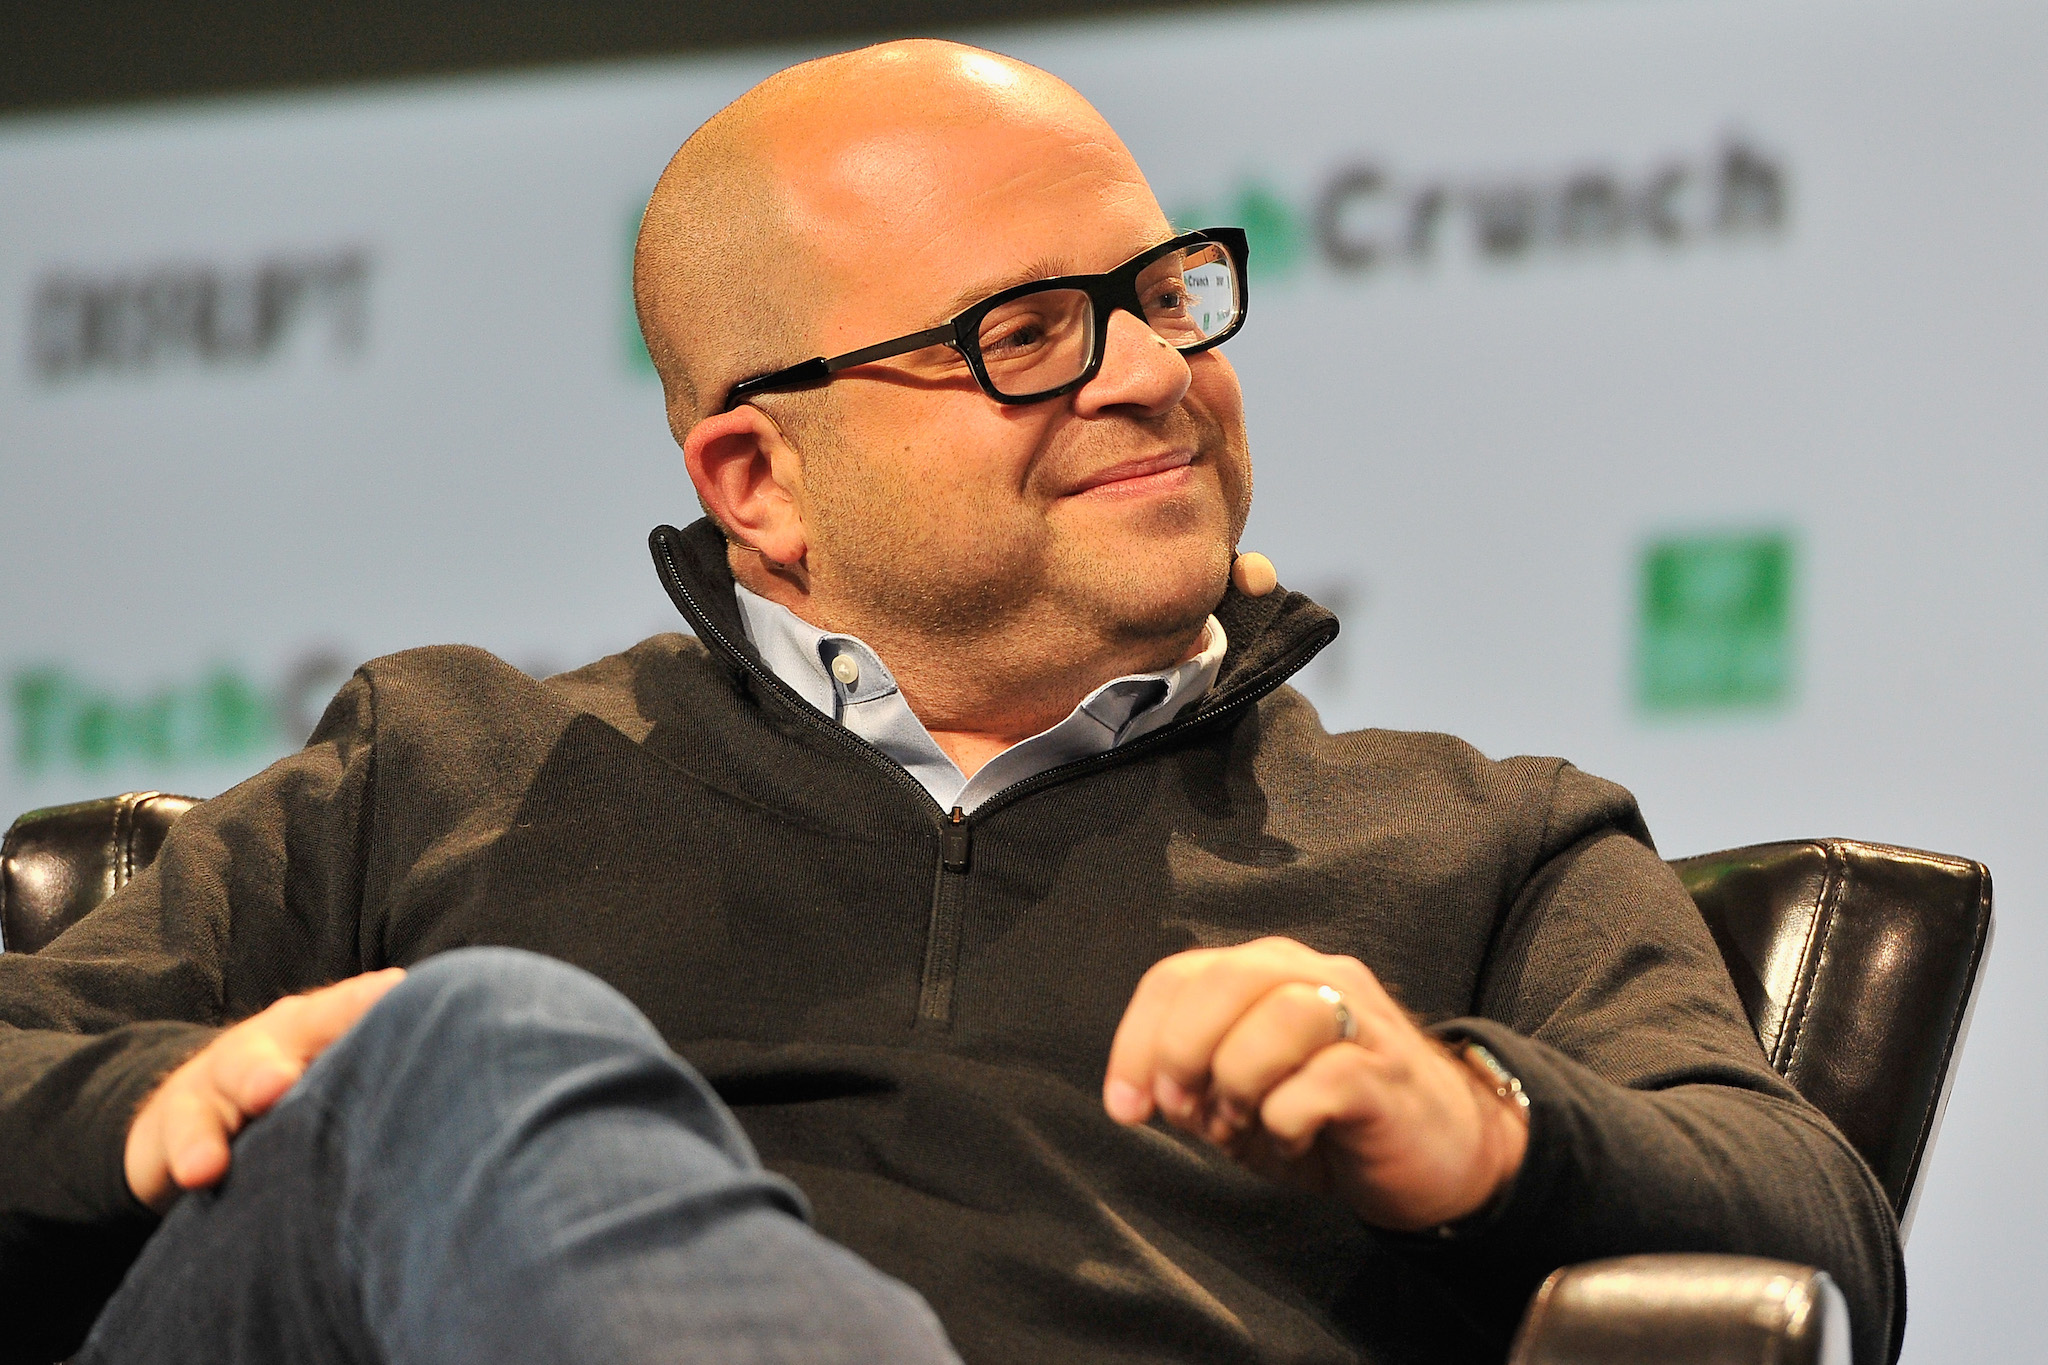 Twilio CEO says technology companies should stay in the Bay